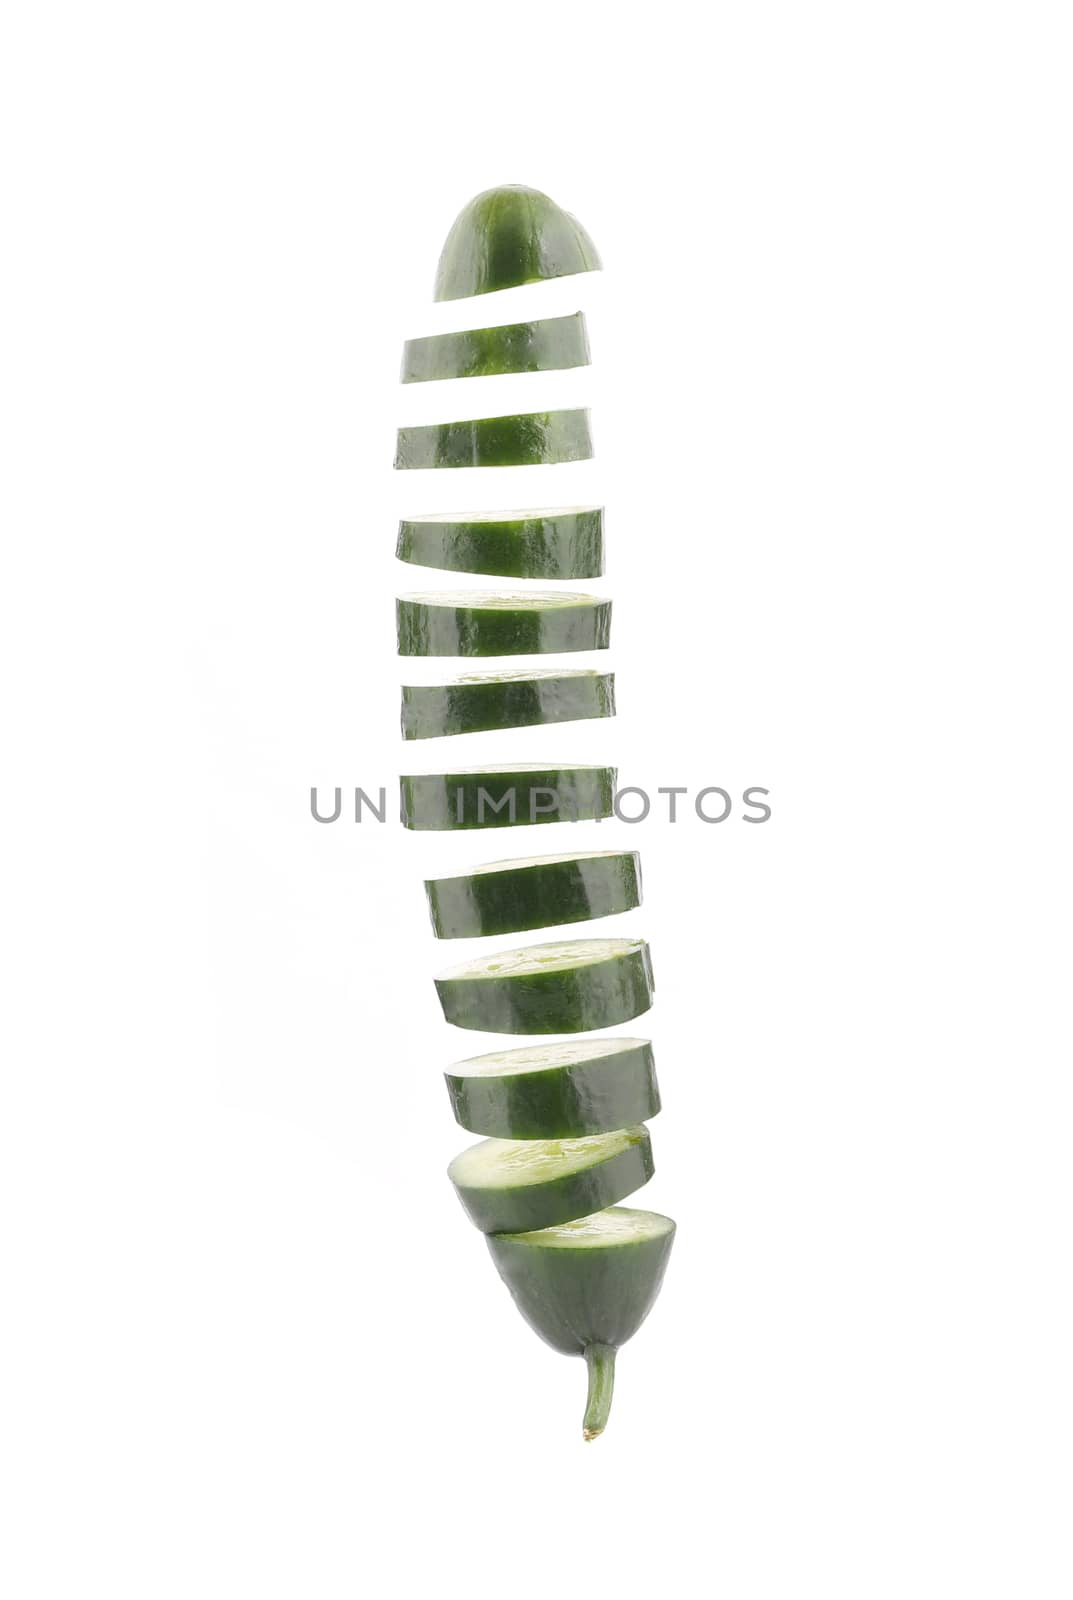 Slices of cucumber. by indigolotos